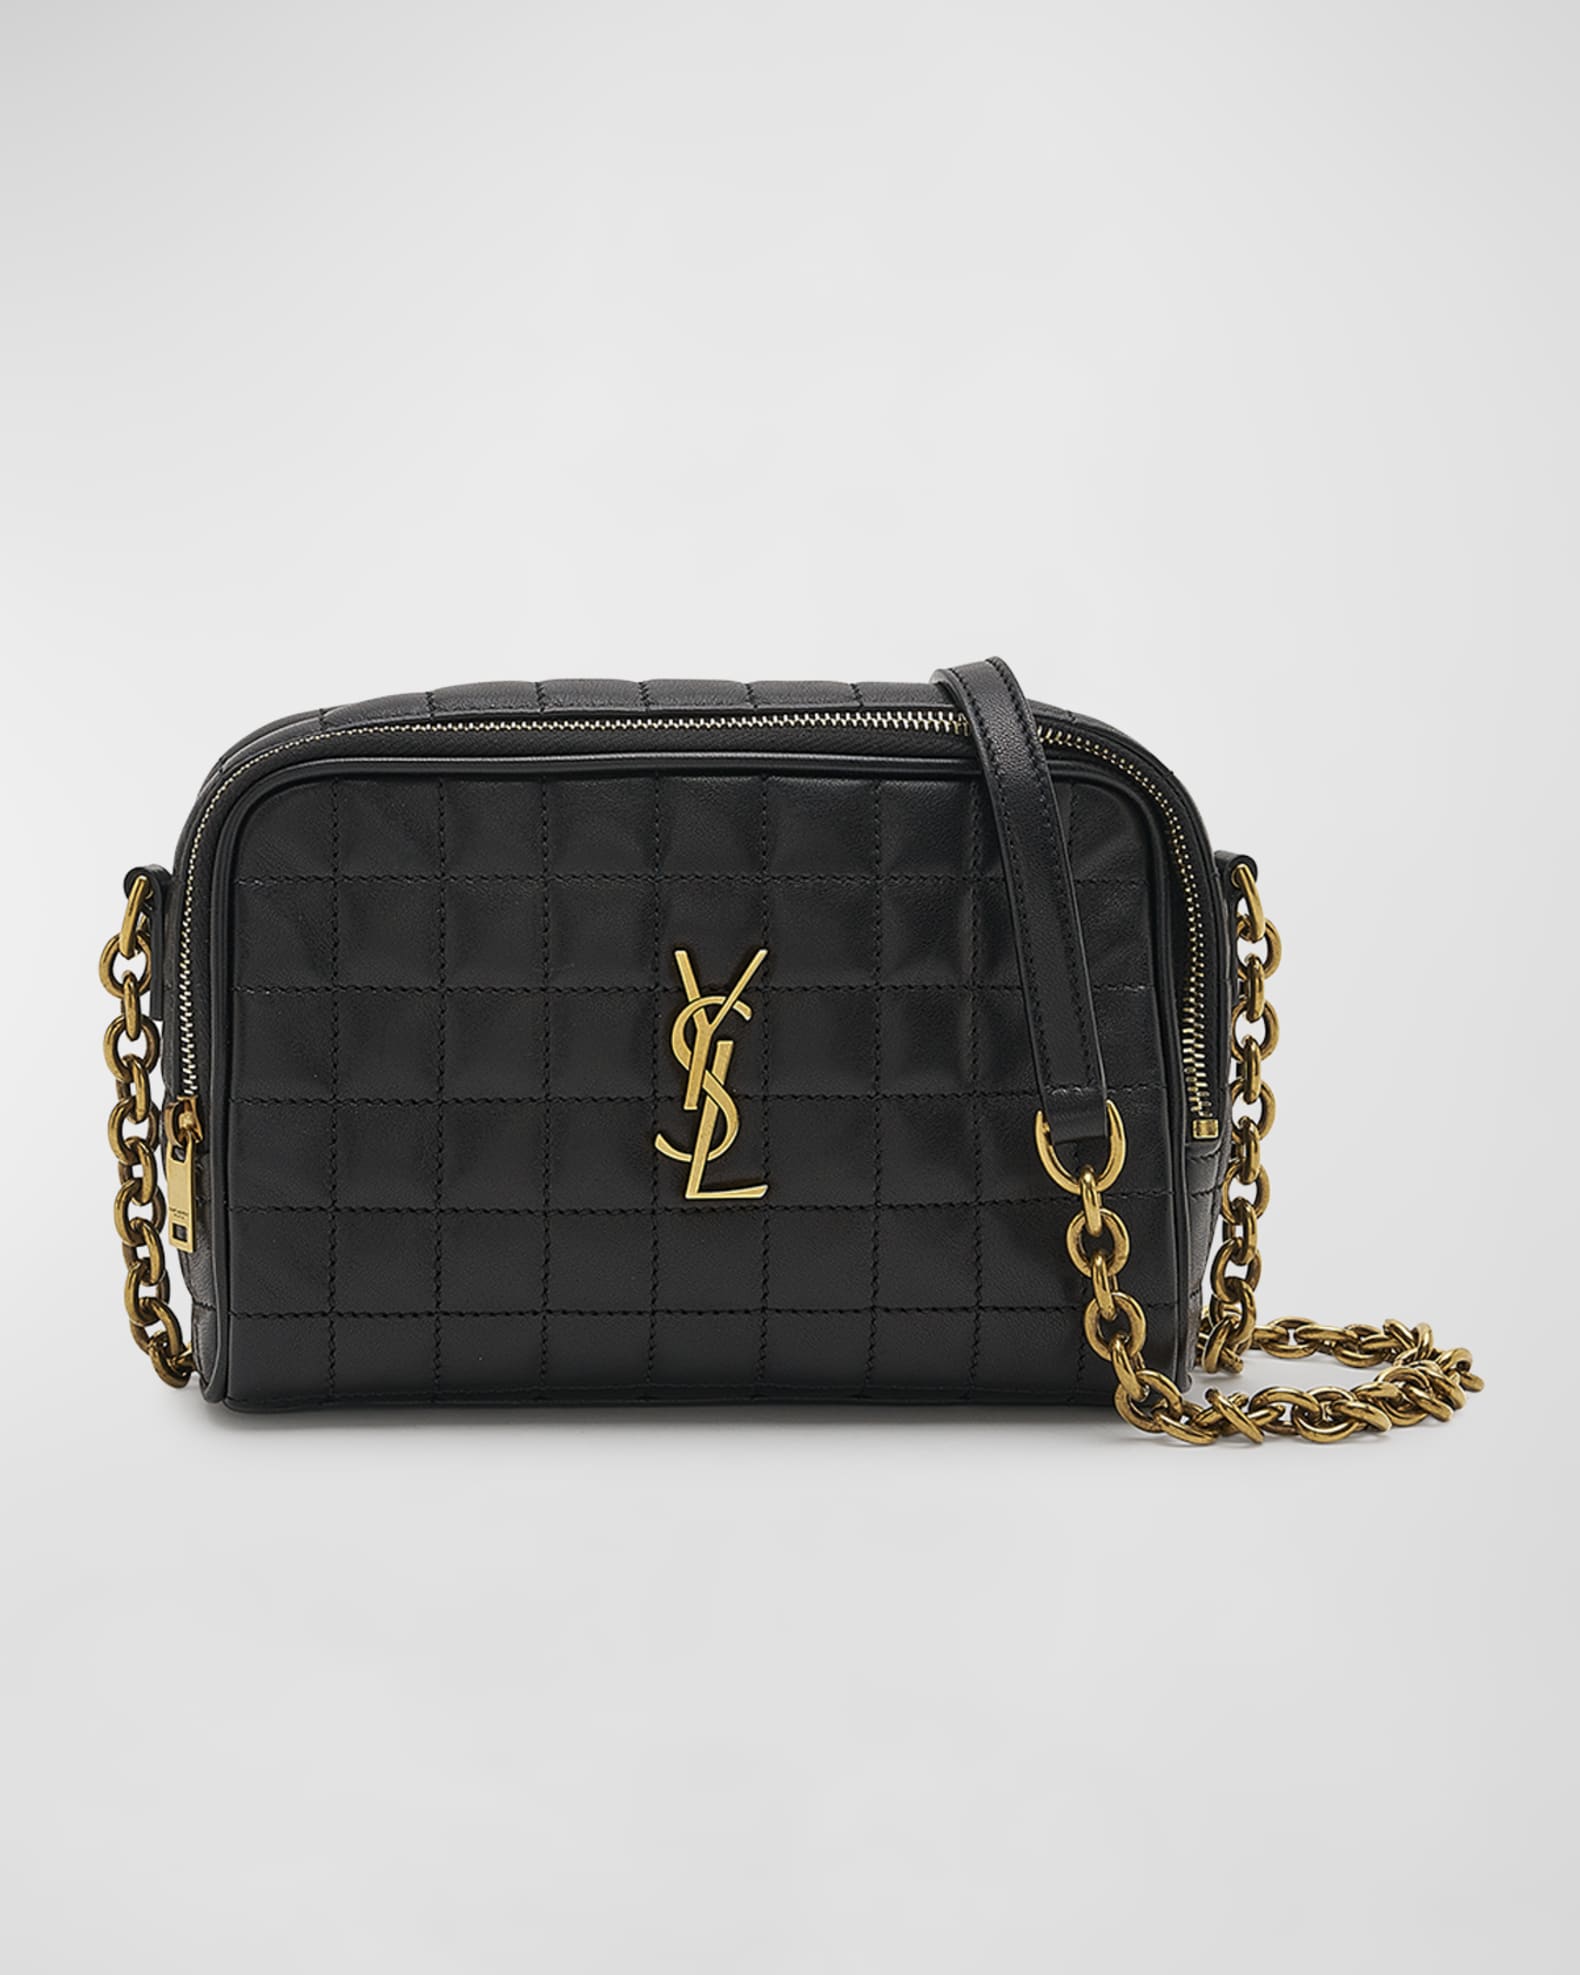 YSL Yves Saint Laurent Sunset Medium in Noir. New with card, box and bag.